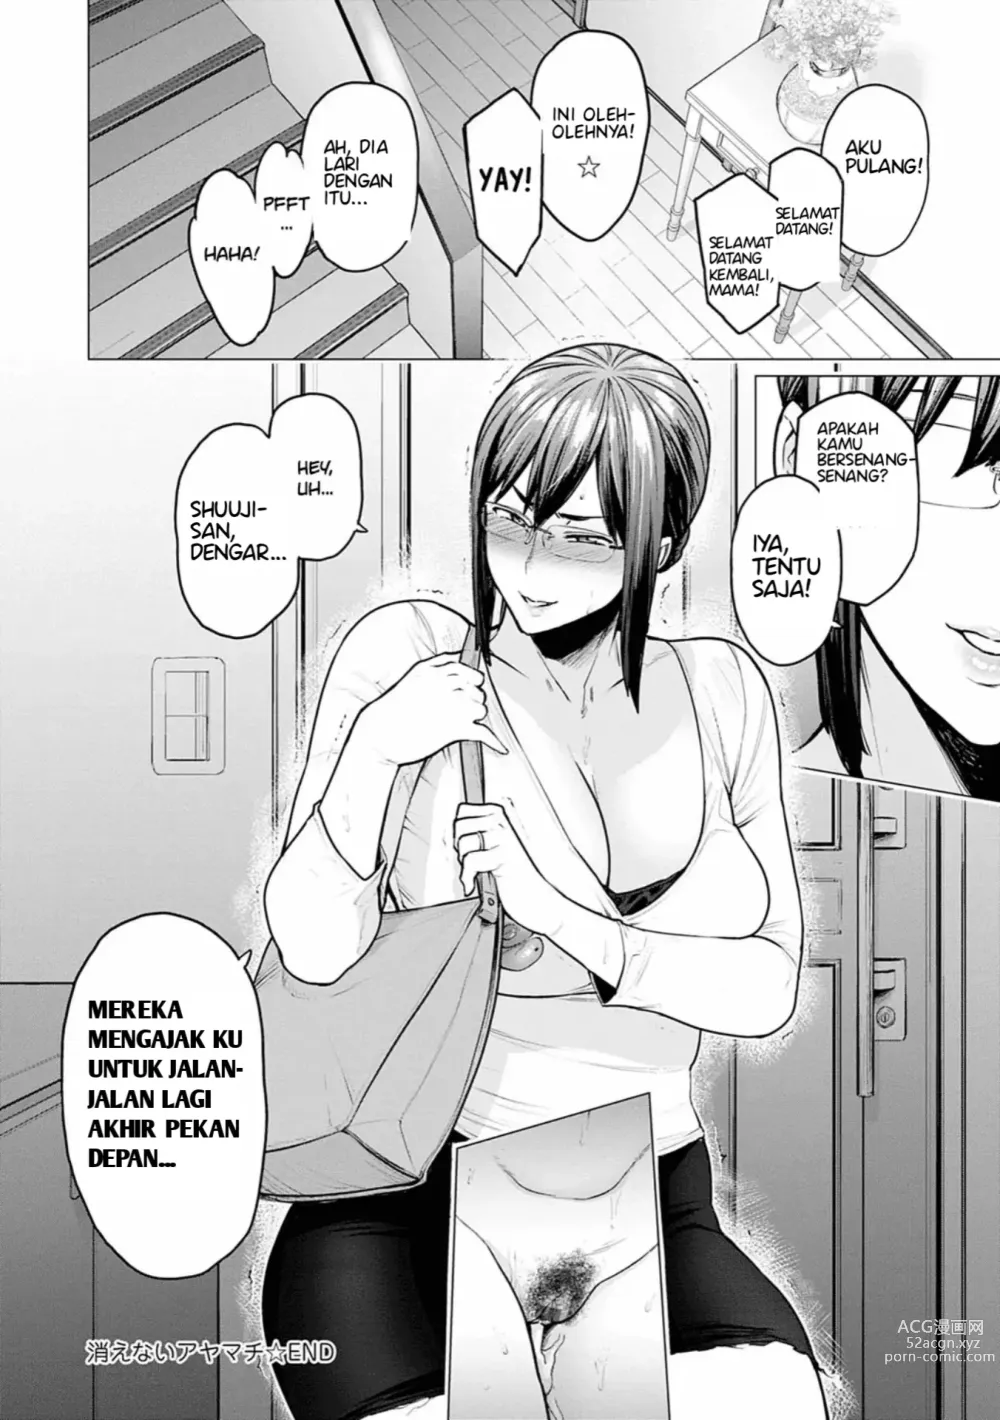 Page 28 of doujinshi The Fault That Can't Be Erased Indonesia